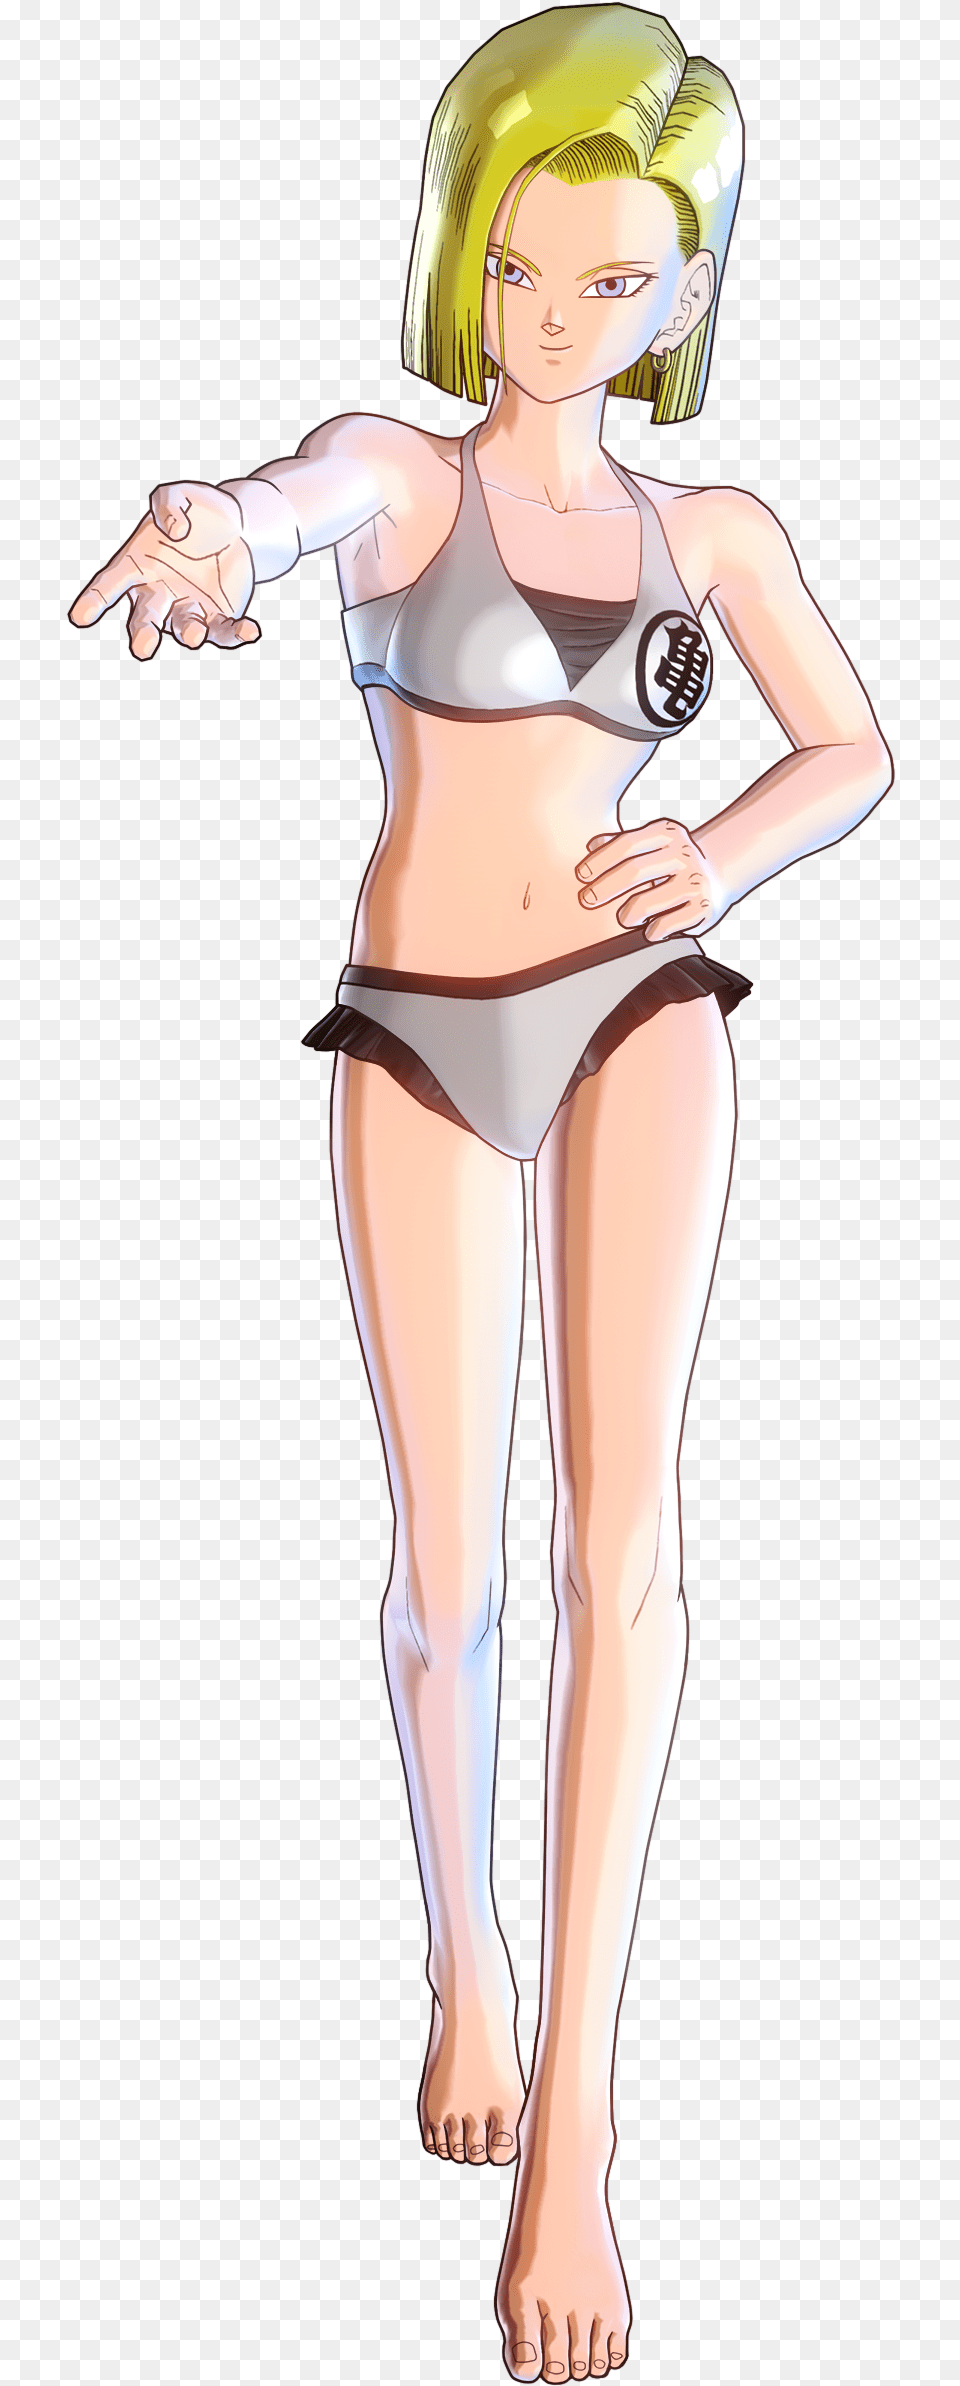 Dragon Ball Xenoverse 2 Dlc Android 18 Swimsuit Dragon Ball Xenoverse 2 Towa Bikini, Publication, Book, Comics, Adult Free Transparent Png